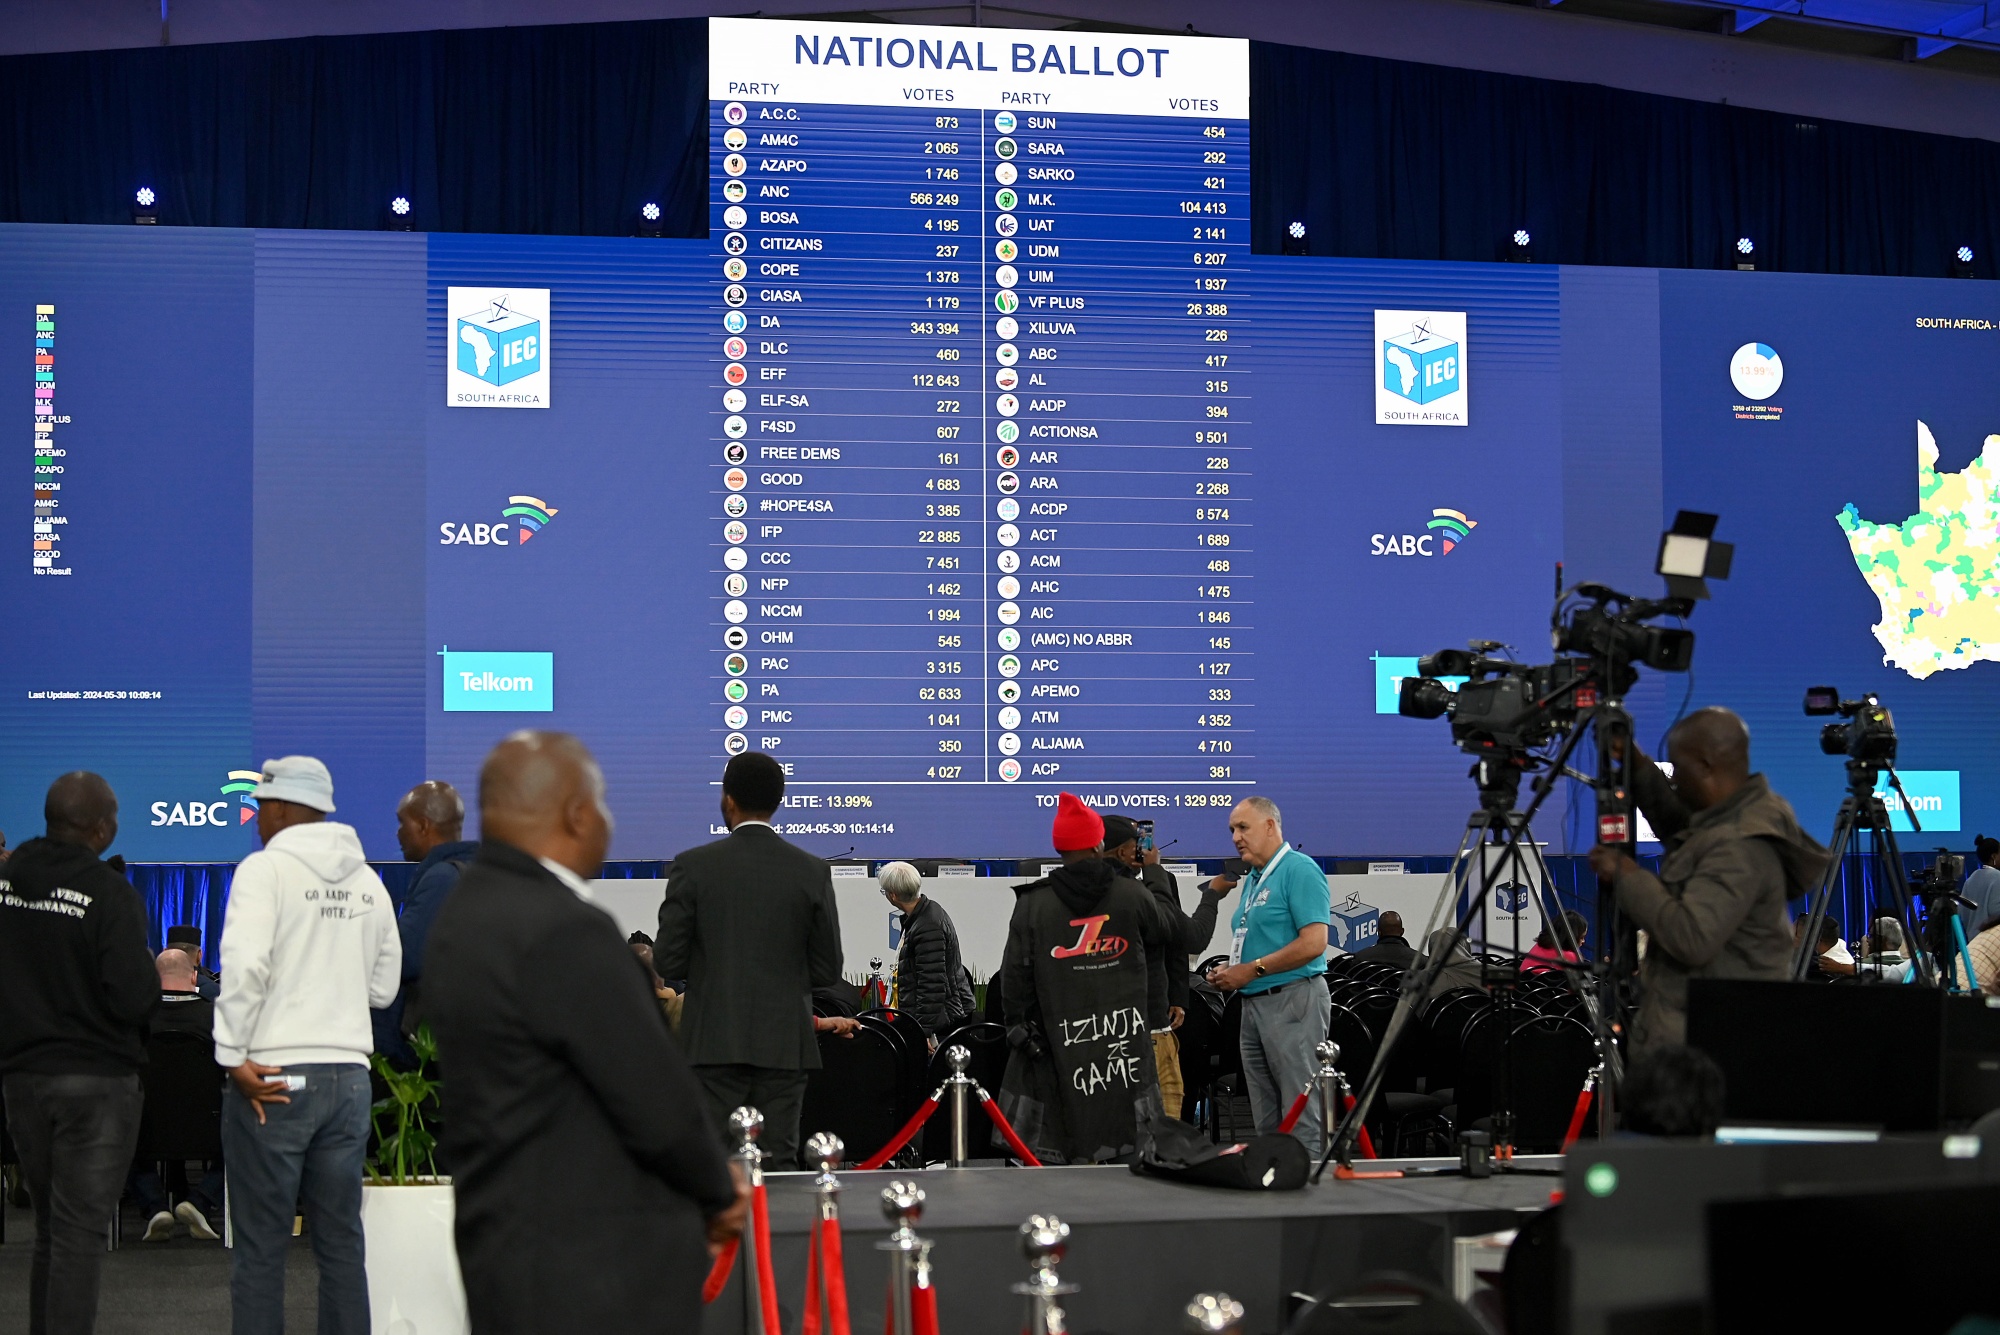 Voting data at the Independent Electoral Commission national results center in Midrand, South Africa, on May 30.